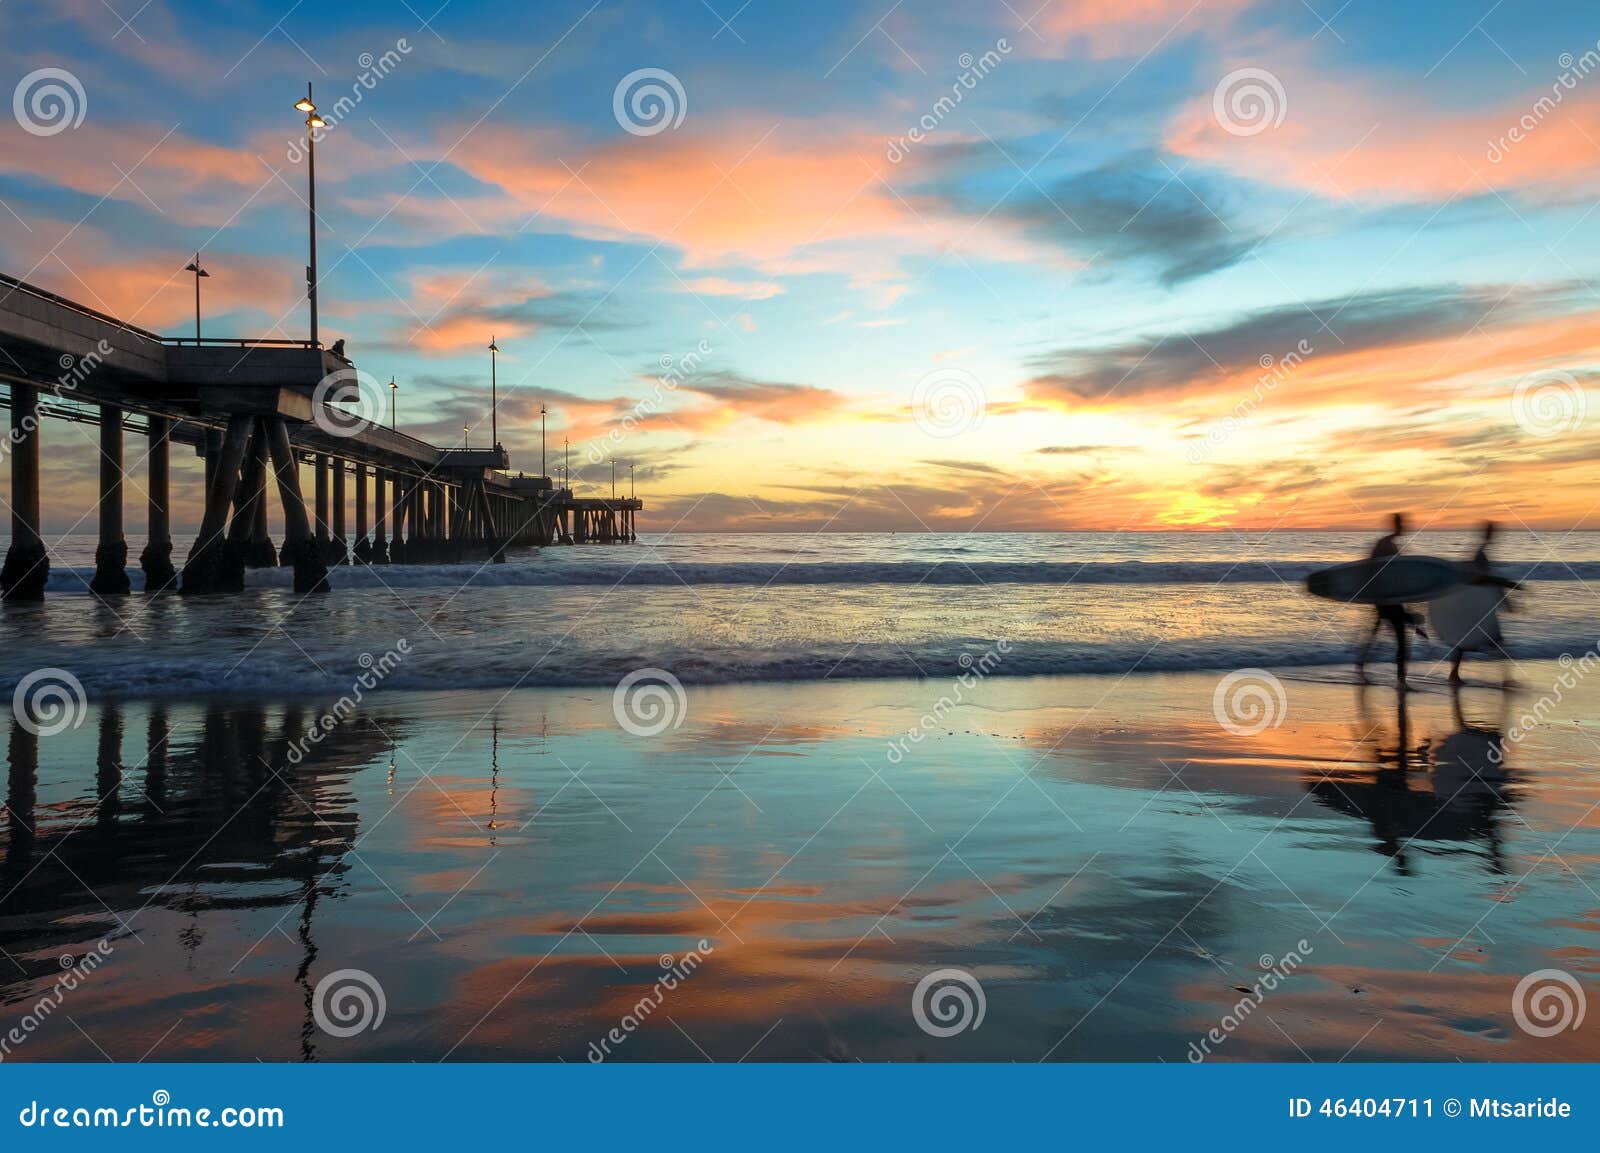 spectacular sunset with surfers at venice beach